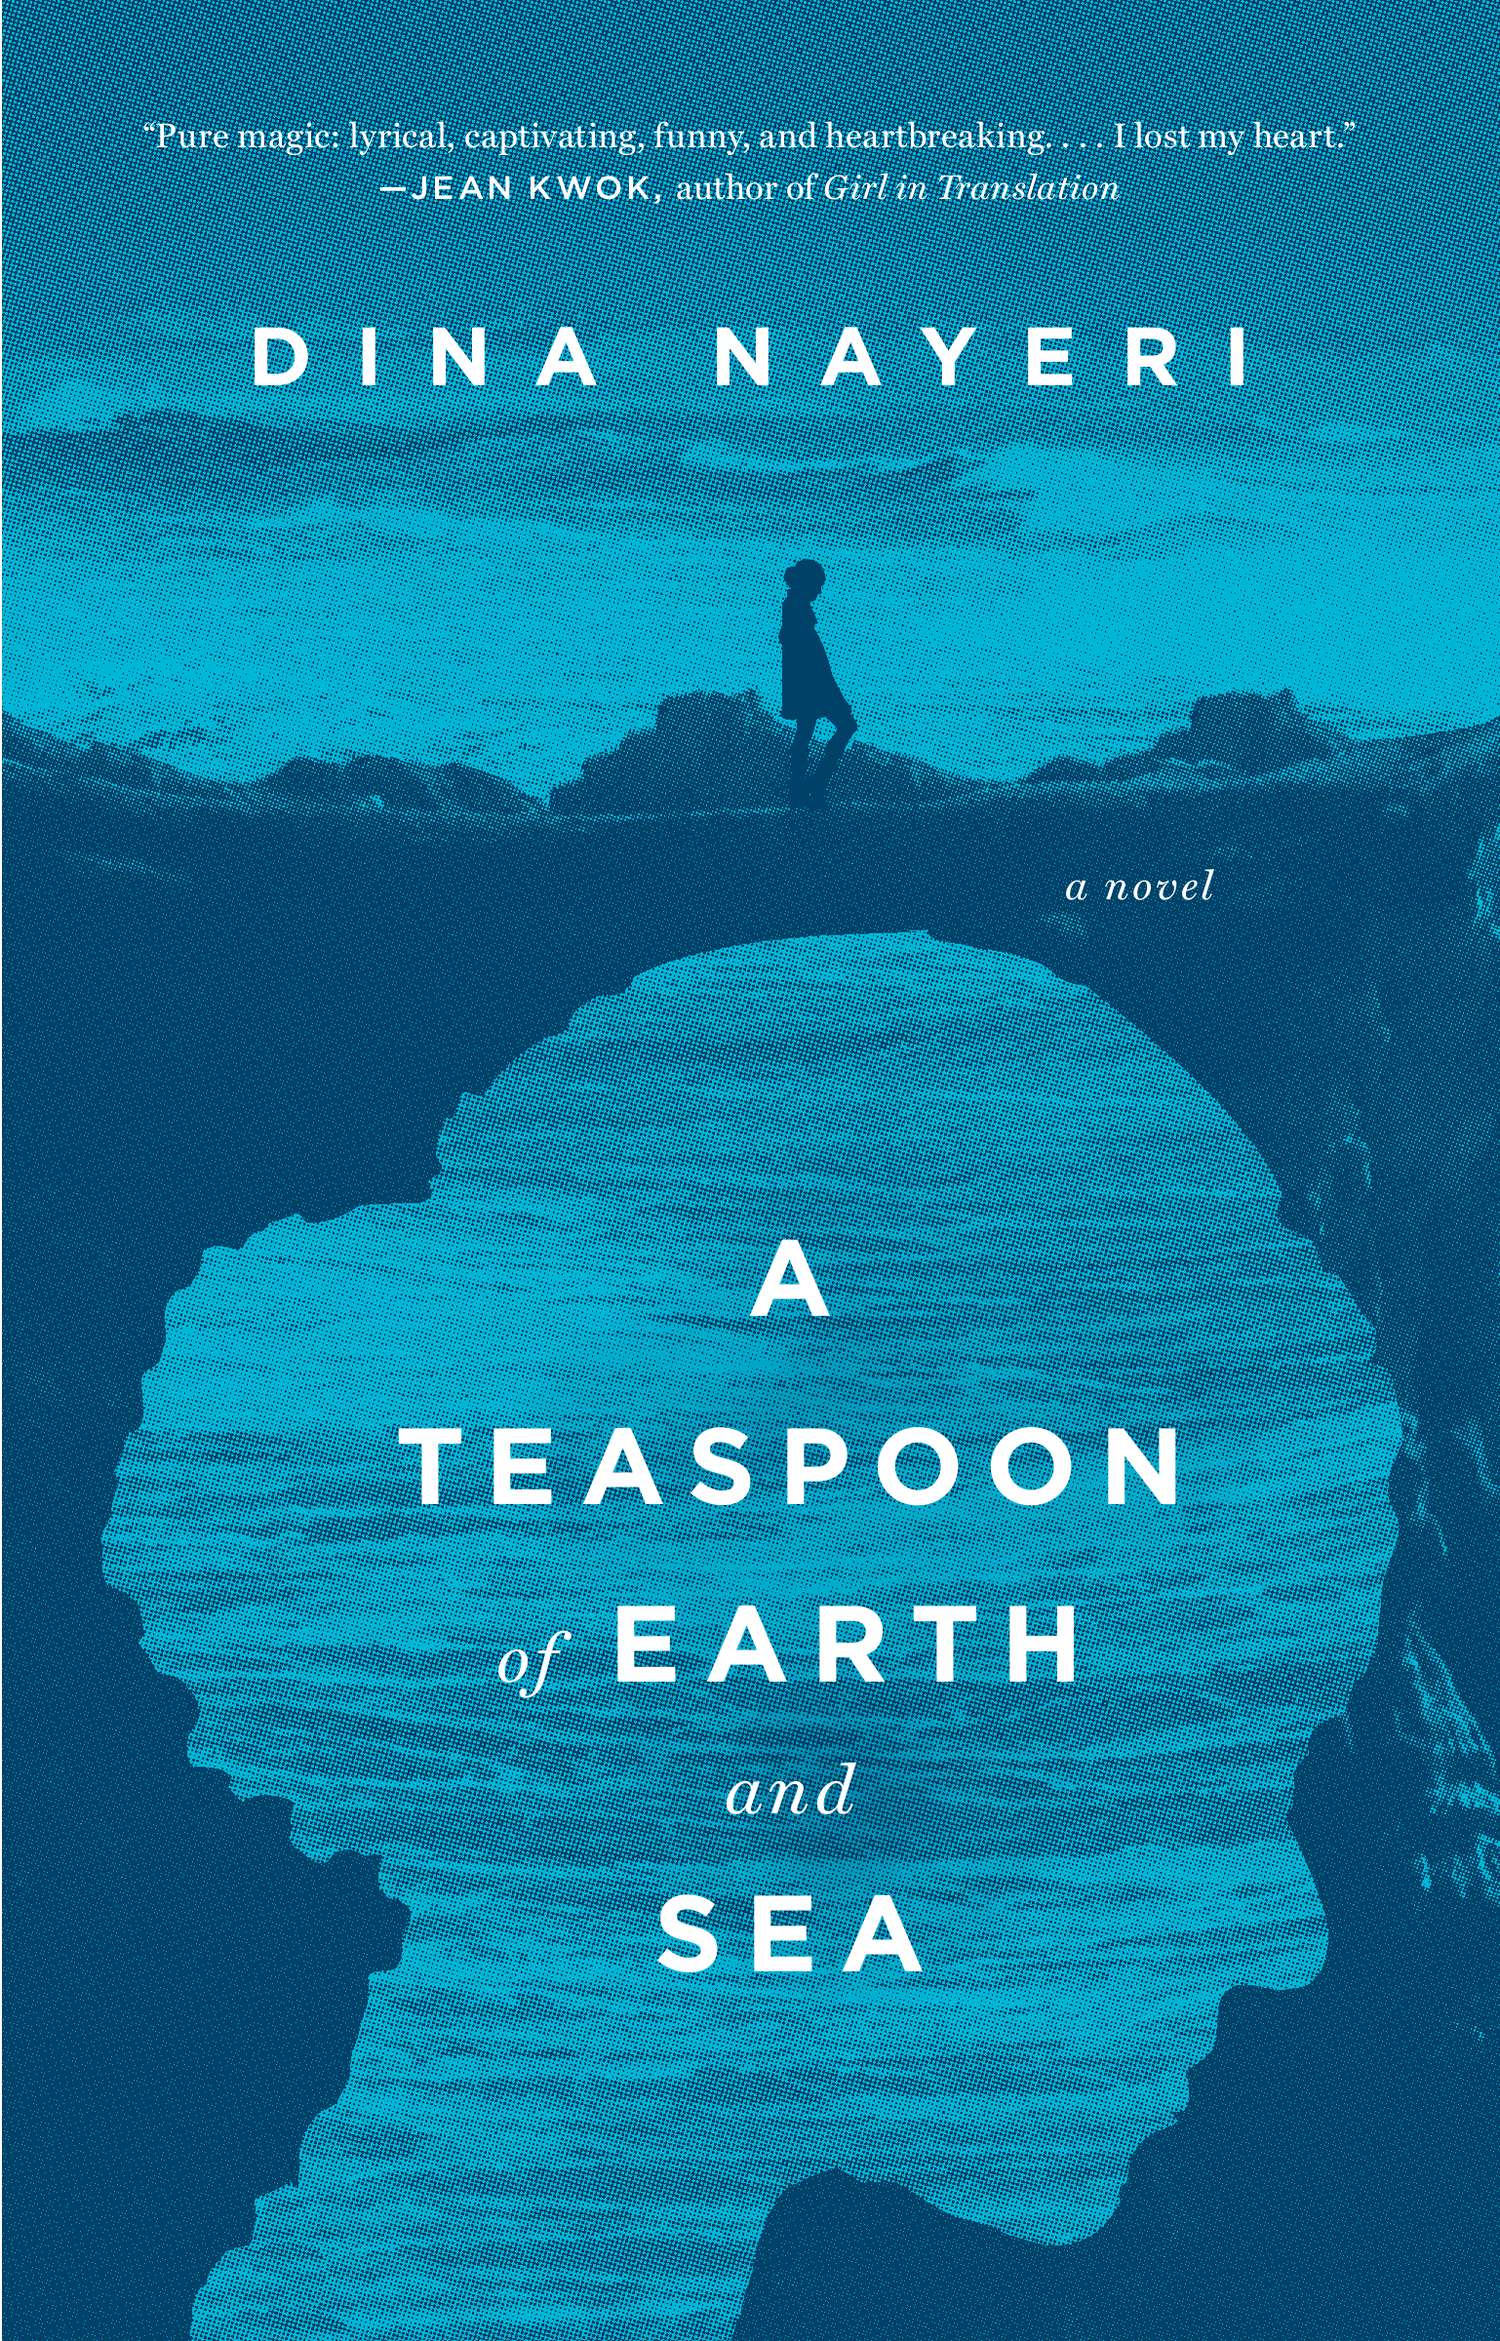 The Penmen Profile: Dina Nayeri, Author of "A Teaspoon of Earth and Sea